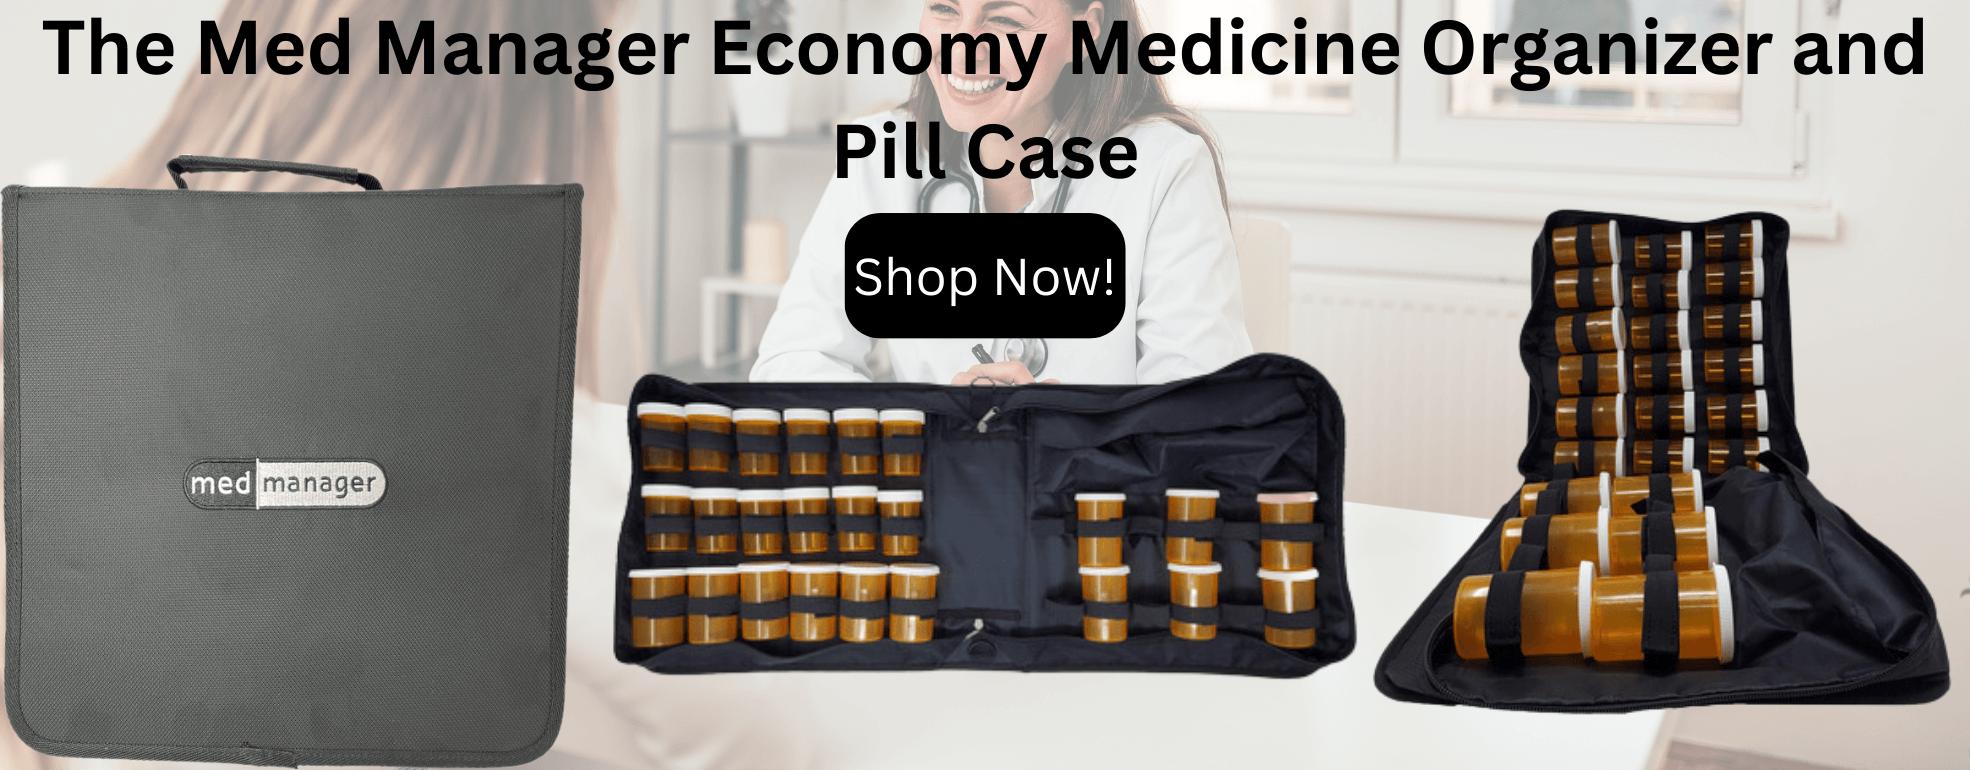 https://cdn11.bigcommerce.com/s-6dpzi5pd3/images/stencil/original/carousel/25/The_Med_Manager_Economy_Medicine_Organizer_and_Pill_Case_1.png?c=1